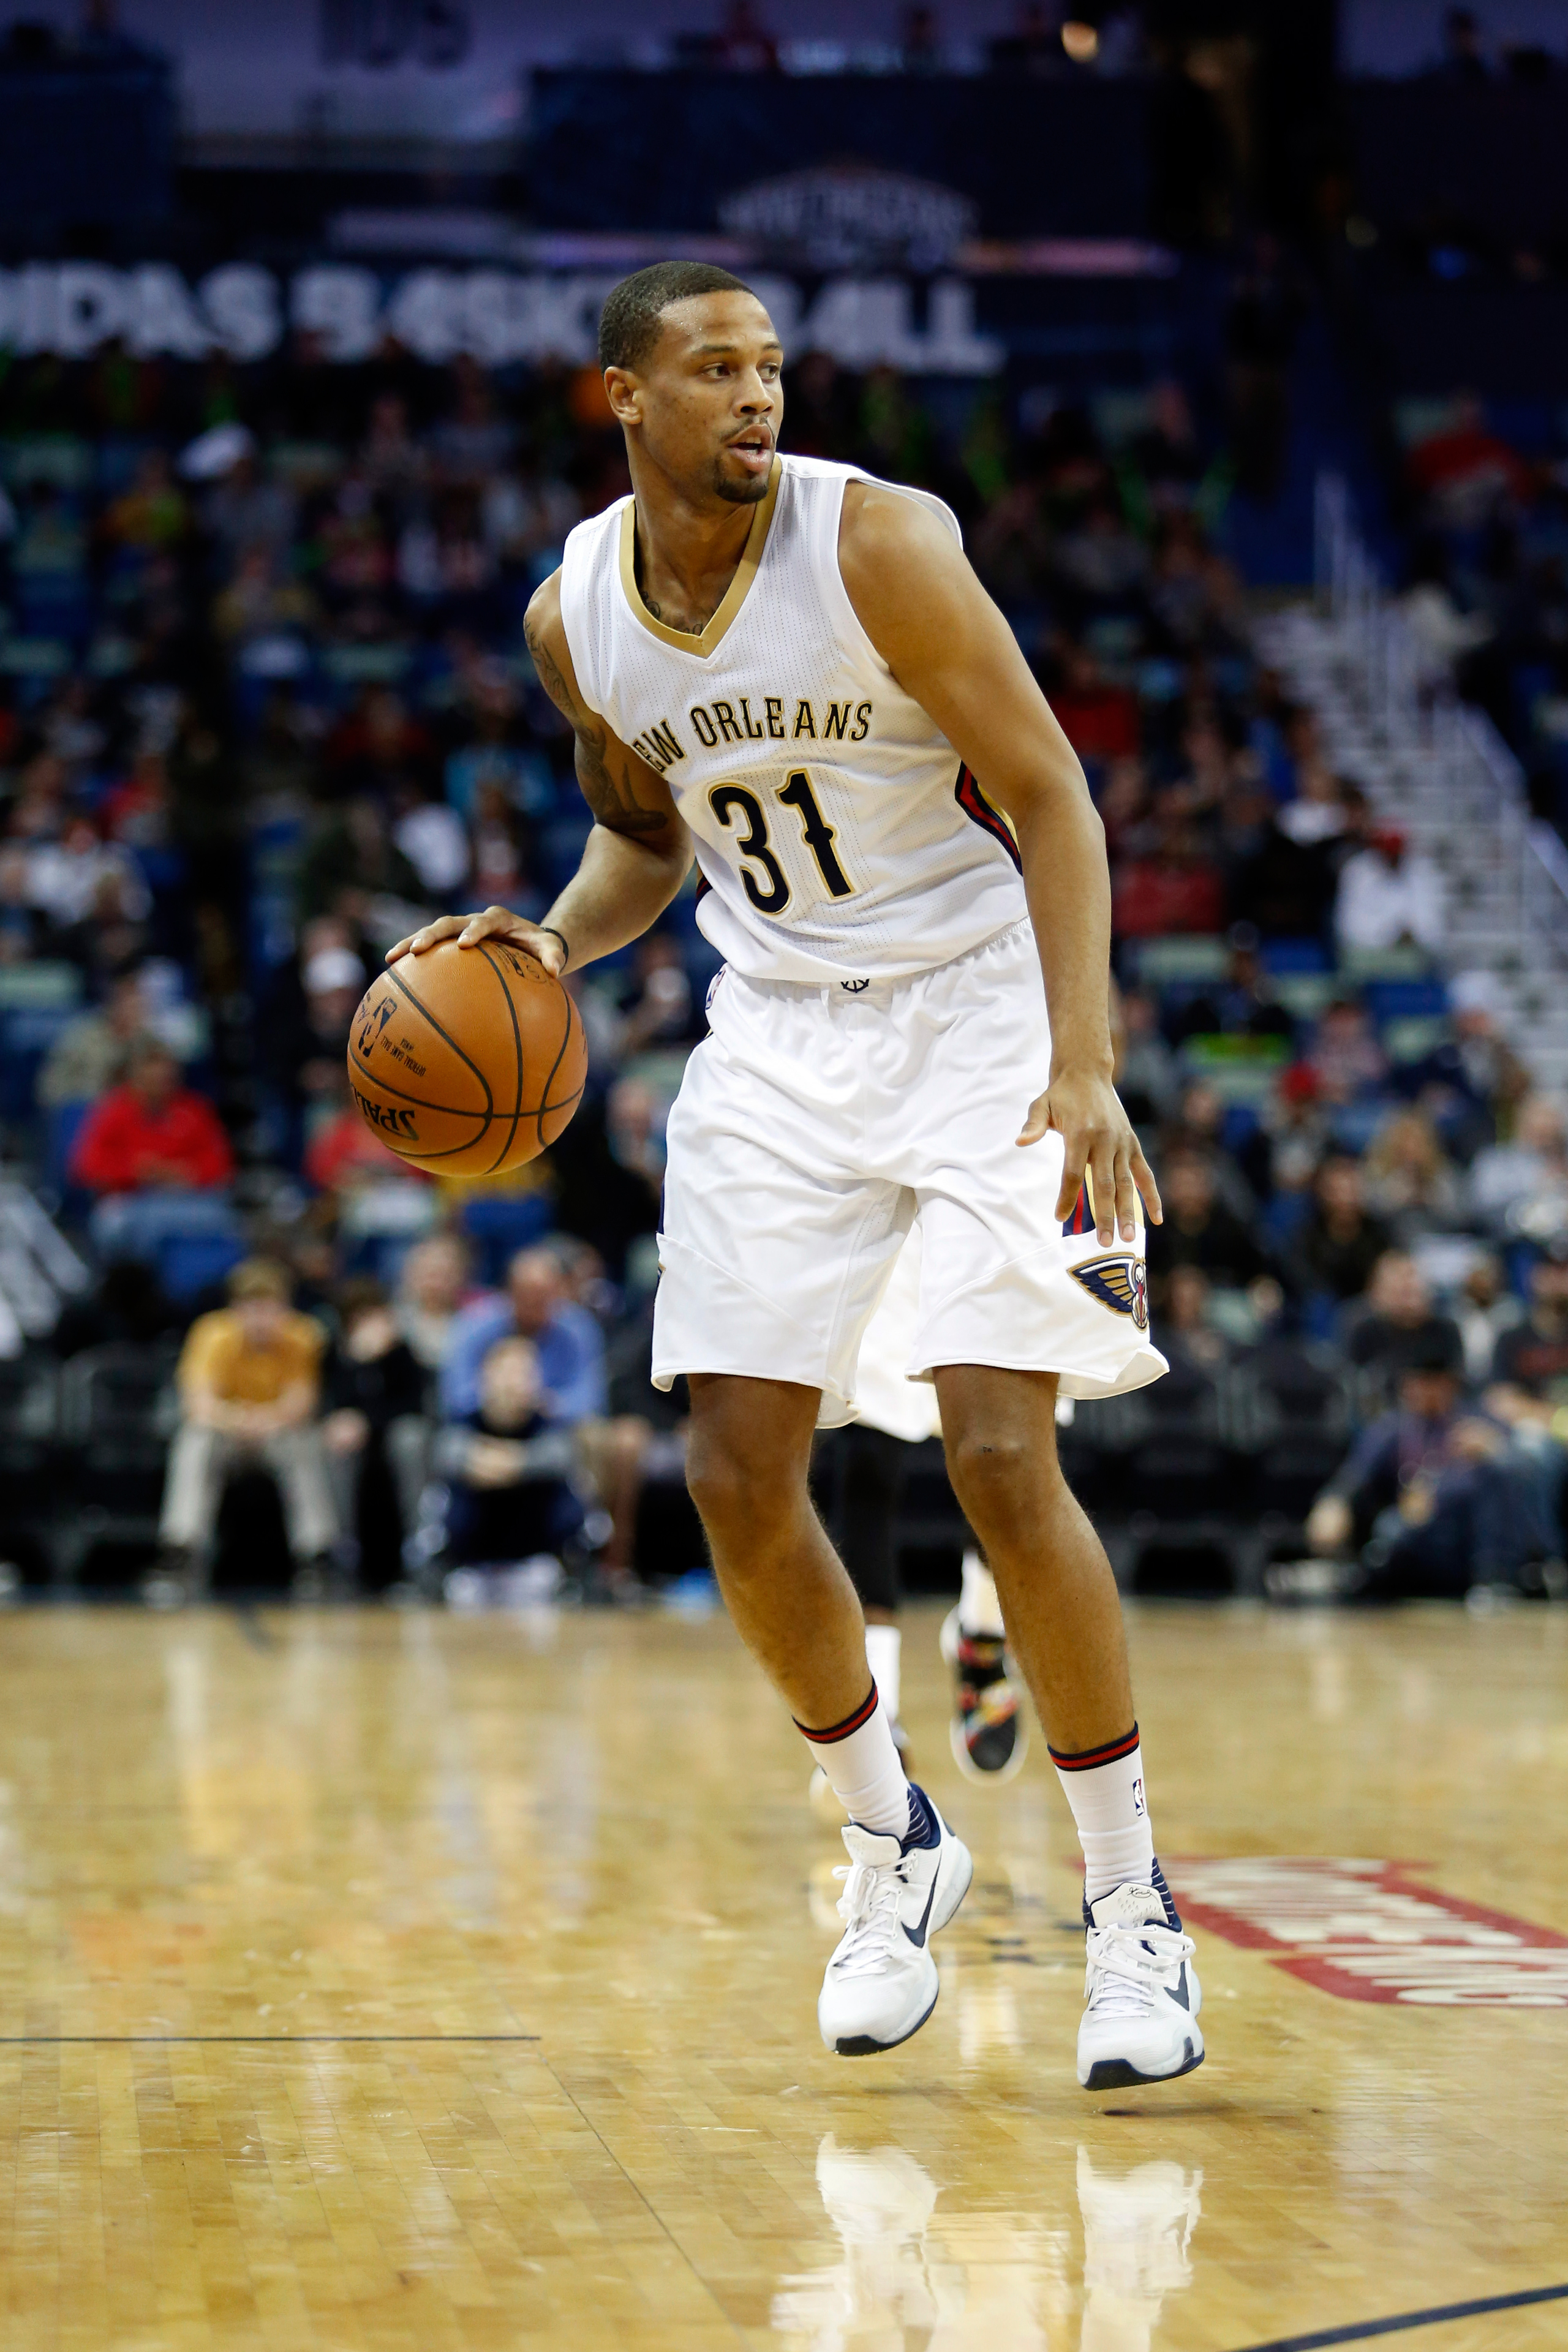 New Orleans Pelicans guard Bryce Dejean-Jones during the first half of an NBA basketball game against the Utah Jazz in New Orleans on Feb. 10, 2016. (Tyler Kaufman—AP)